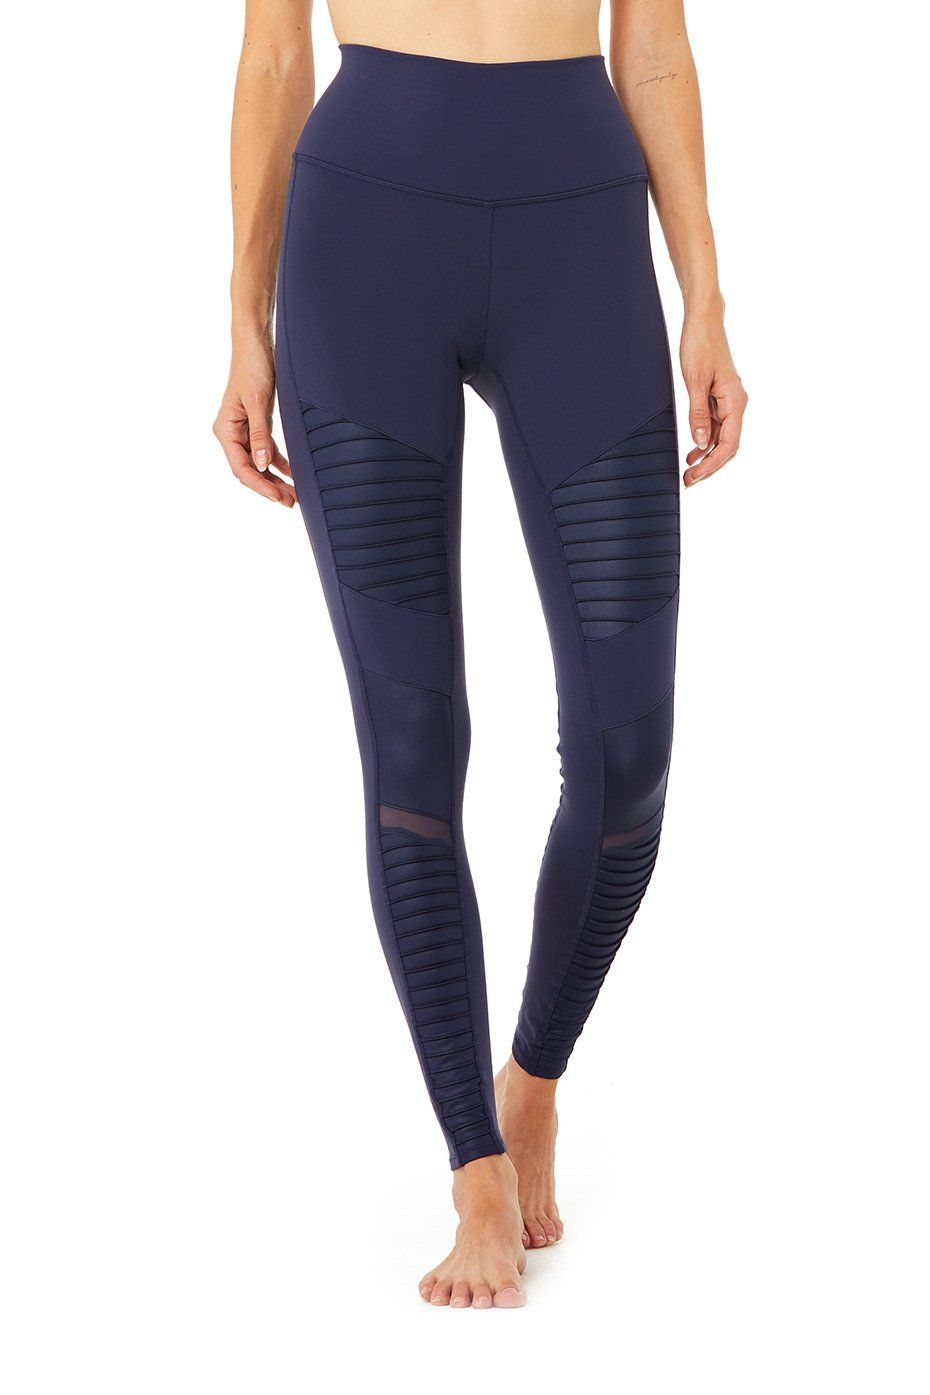 This Legging That Sold Out In A Record 27 Minutes Will Soon Be Restocked! -  VITA Daily